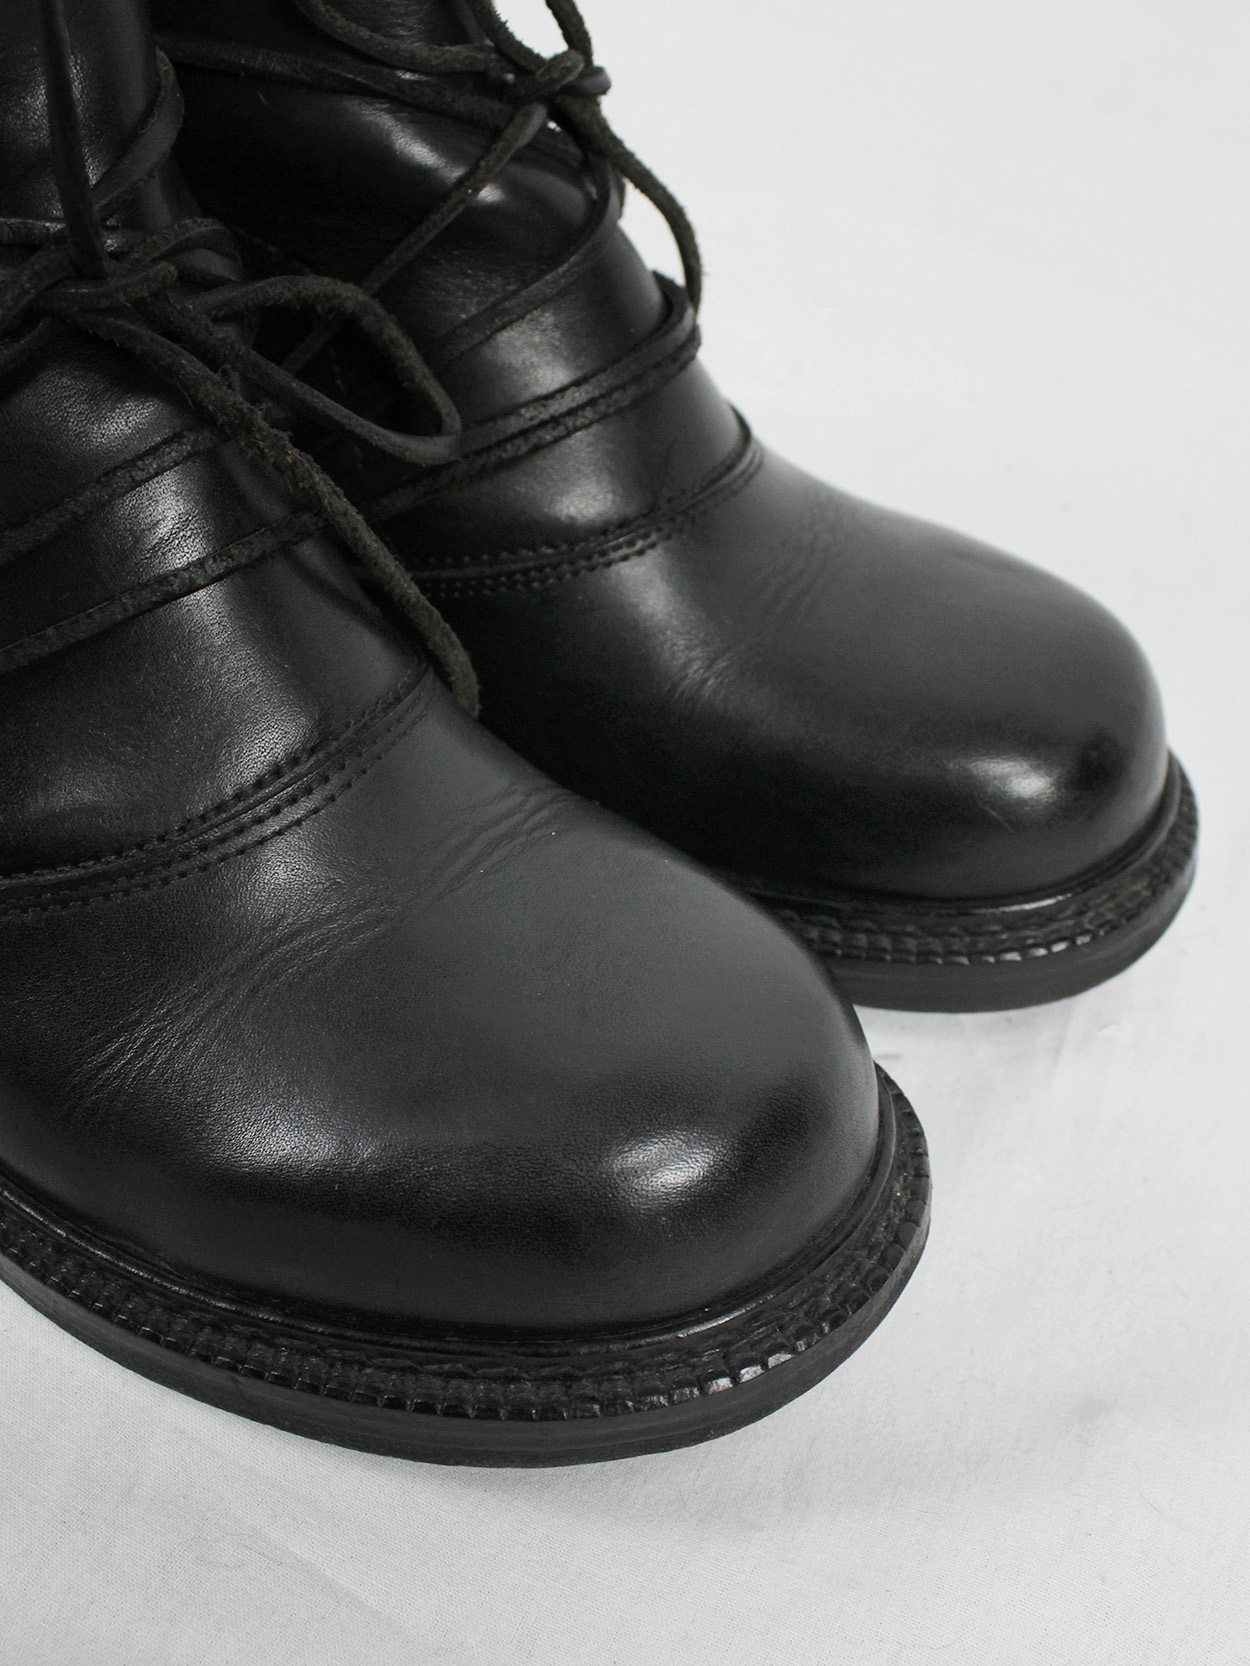 vaniitas vintage Dirk Bikkembergs black boots with laces through the soles fall 1994 8069